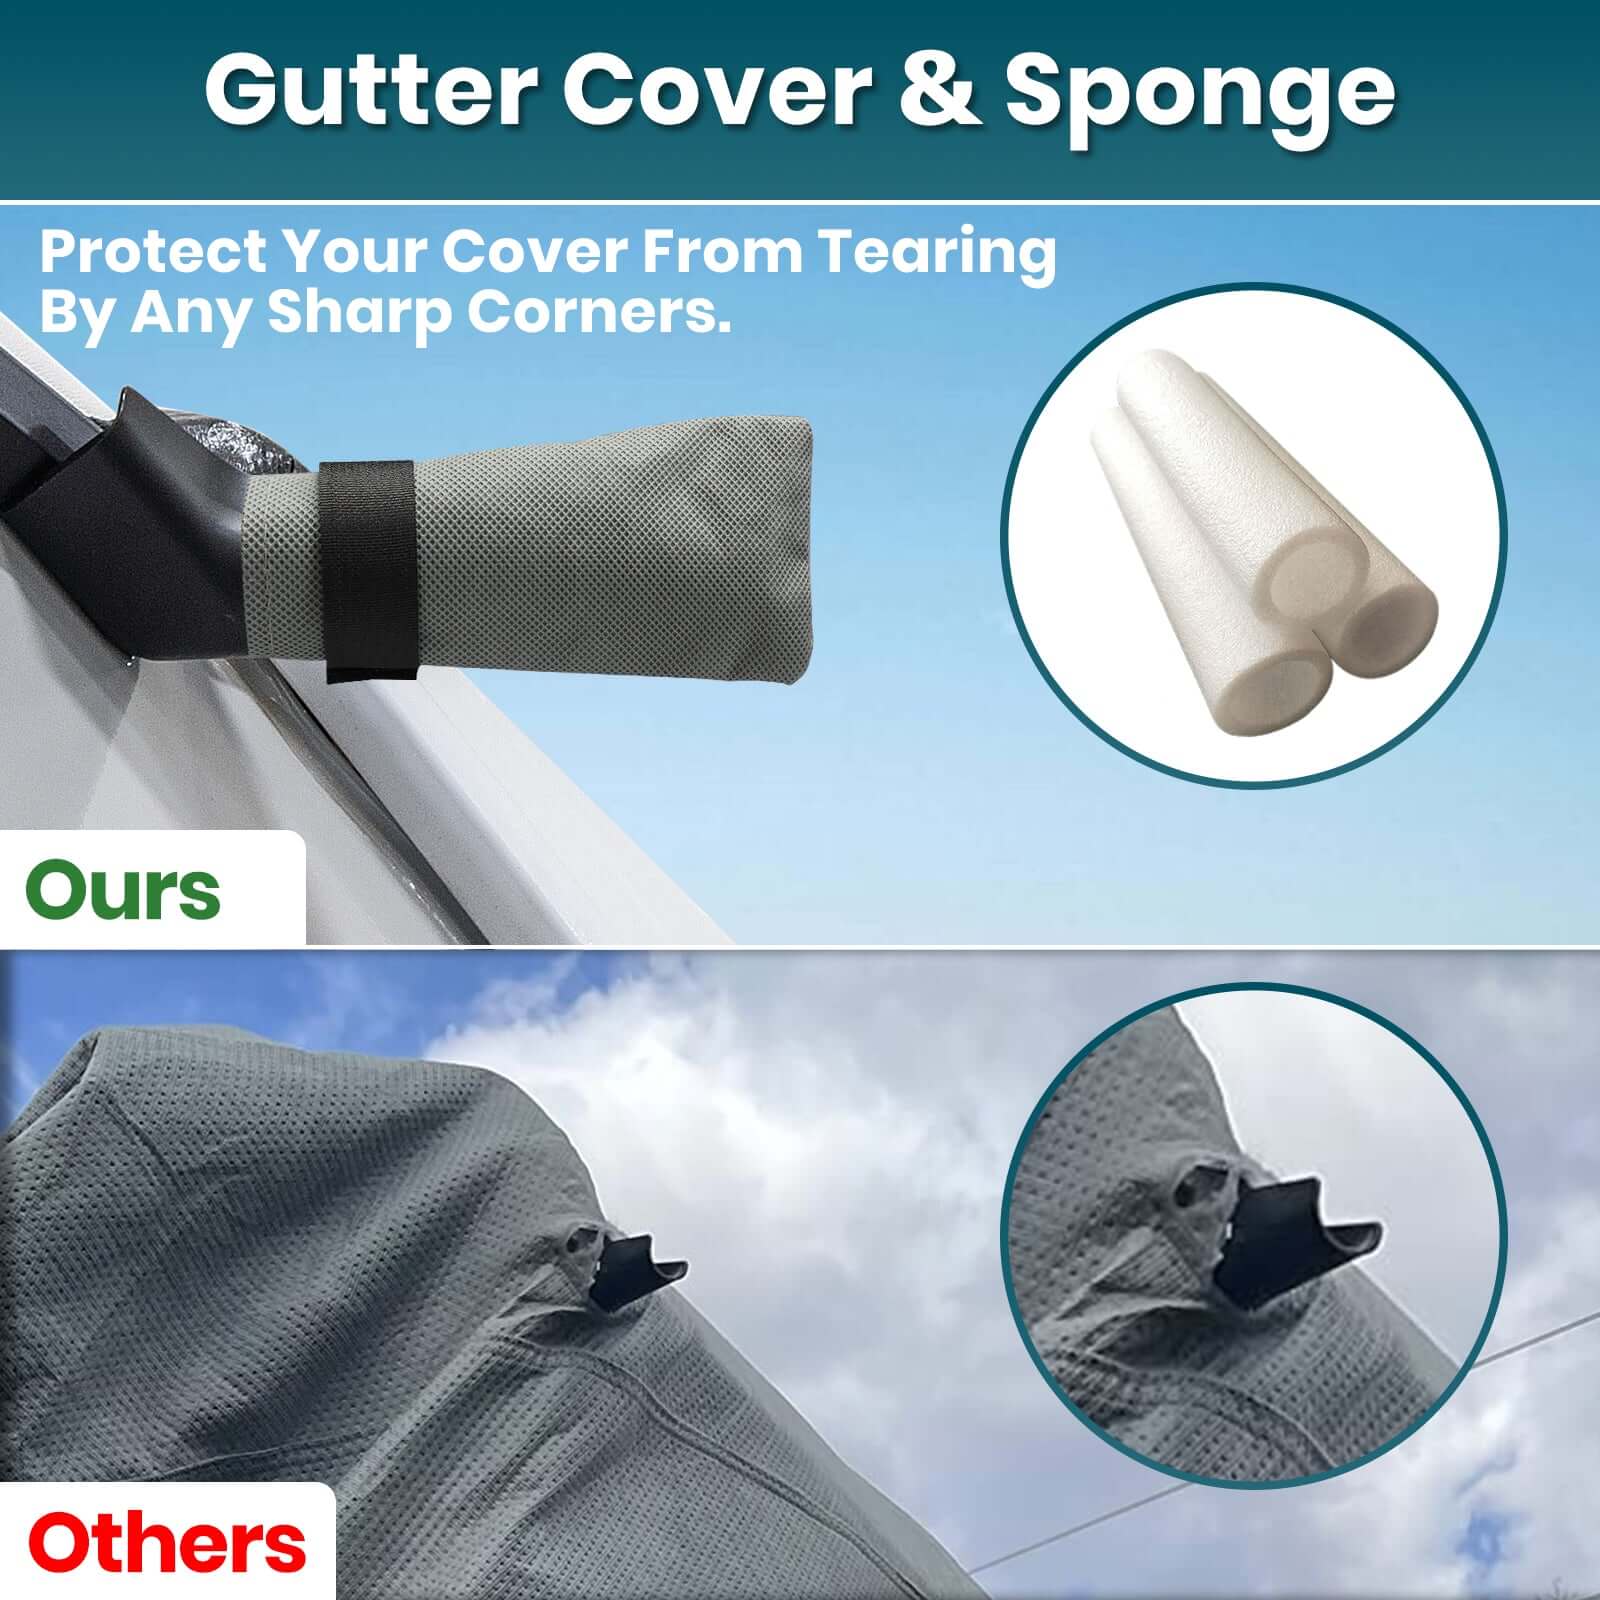 Camper Covers | 5th Fifth Wheel RV Covers 7 Layers Winter Waterproof